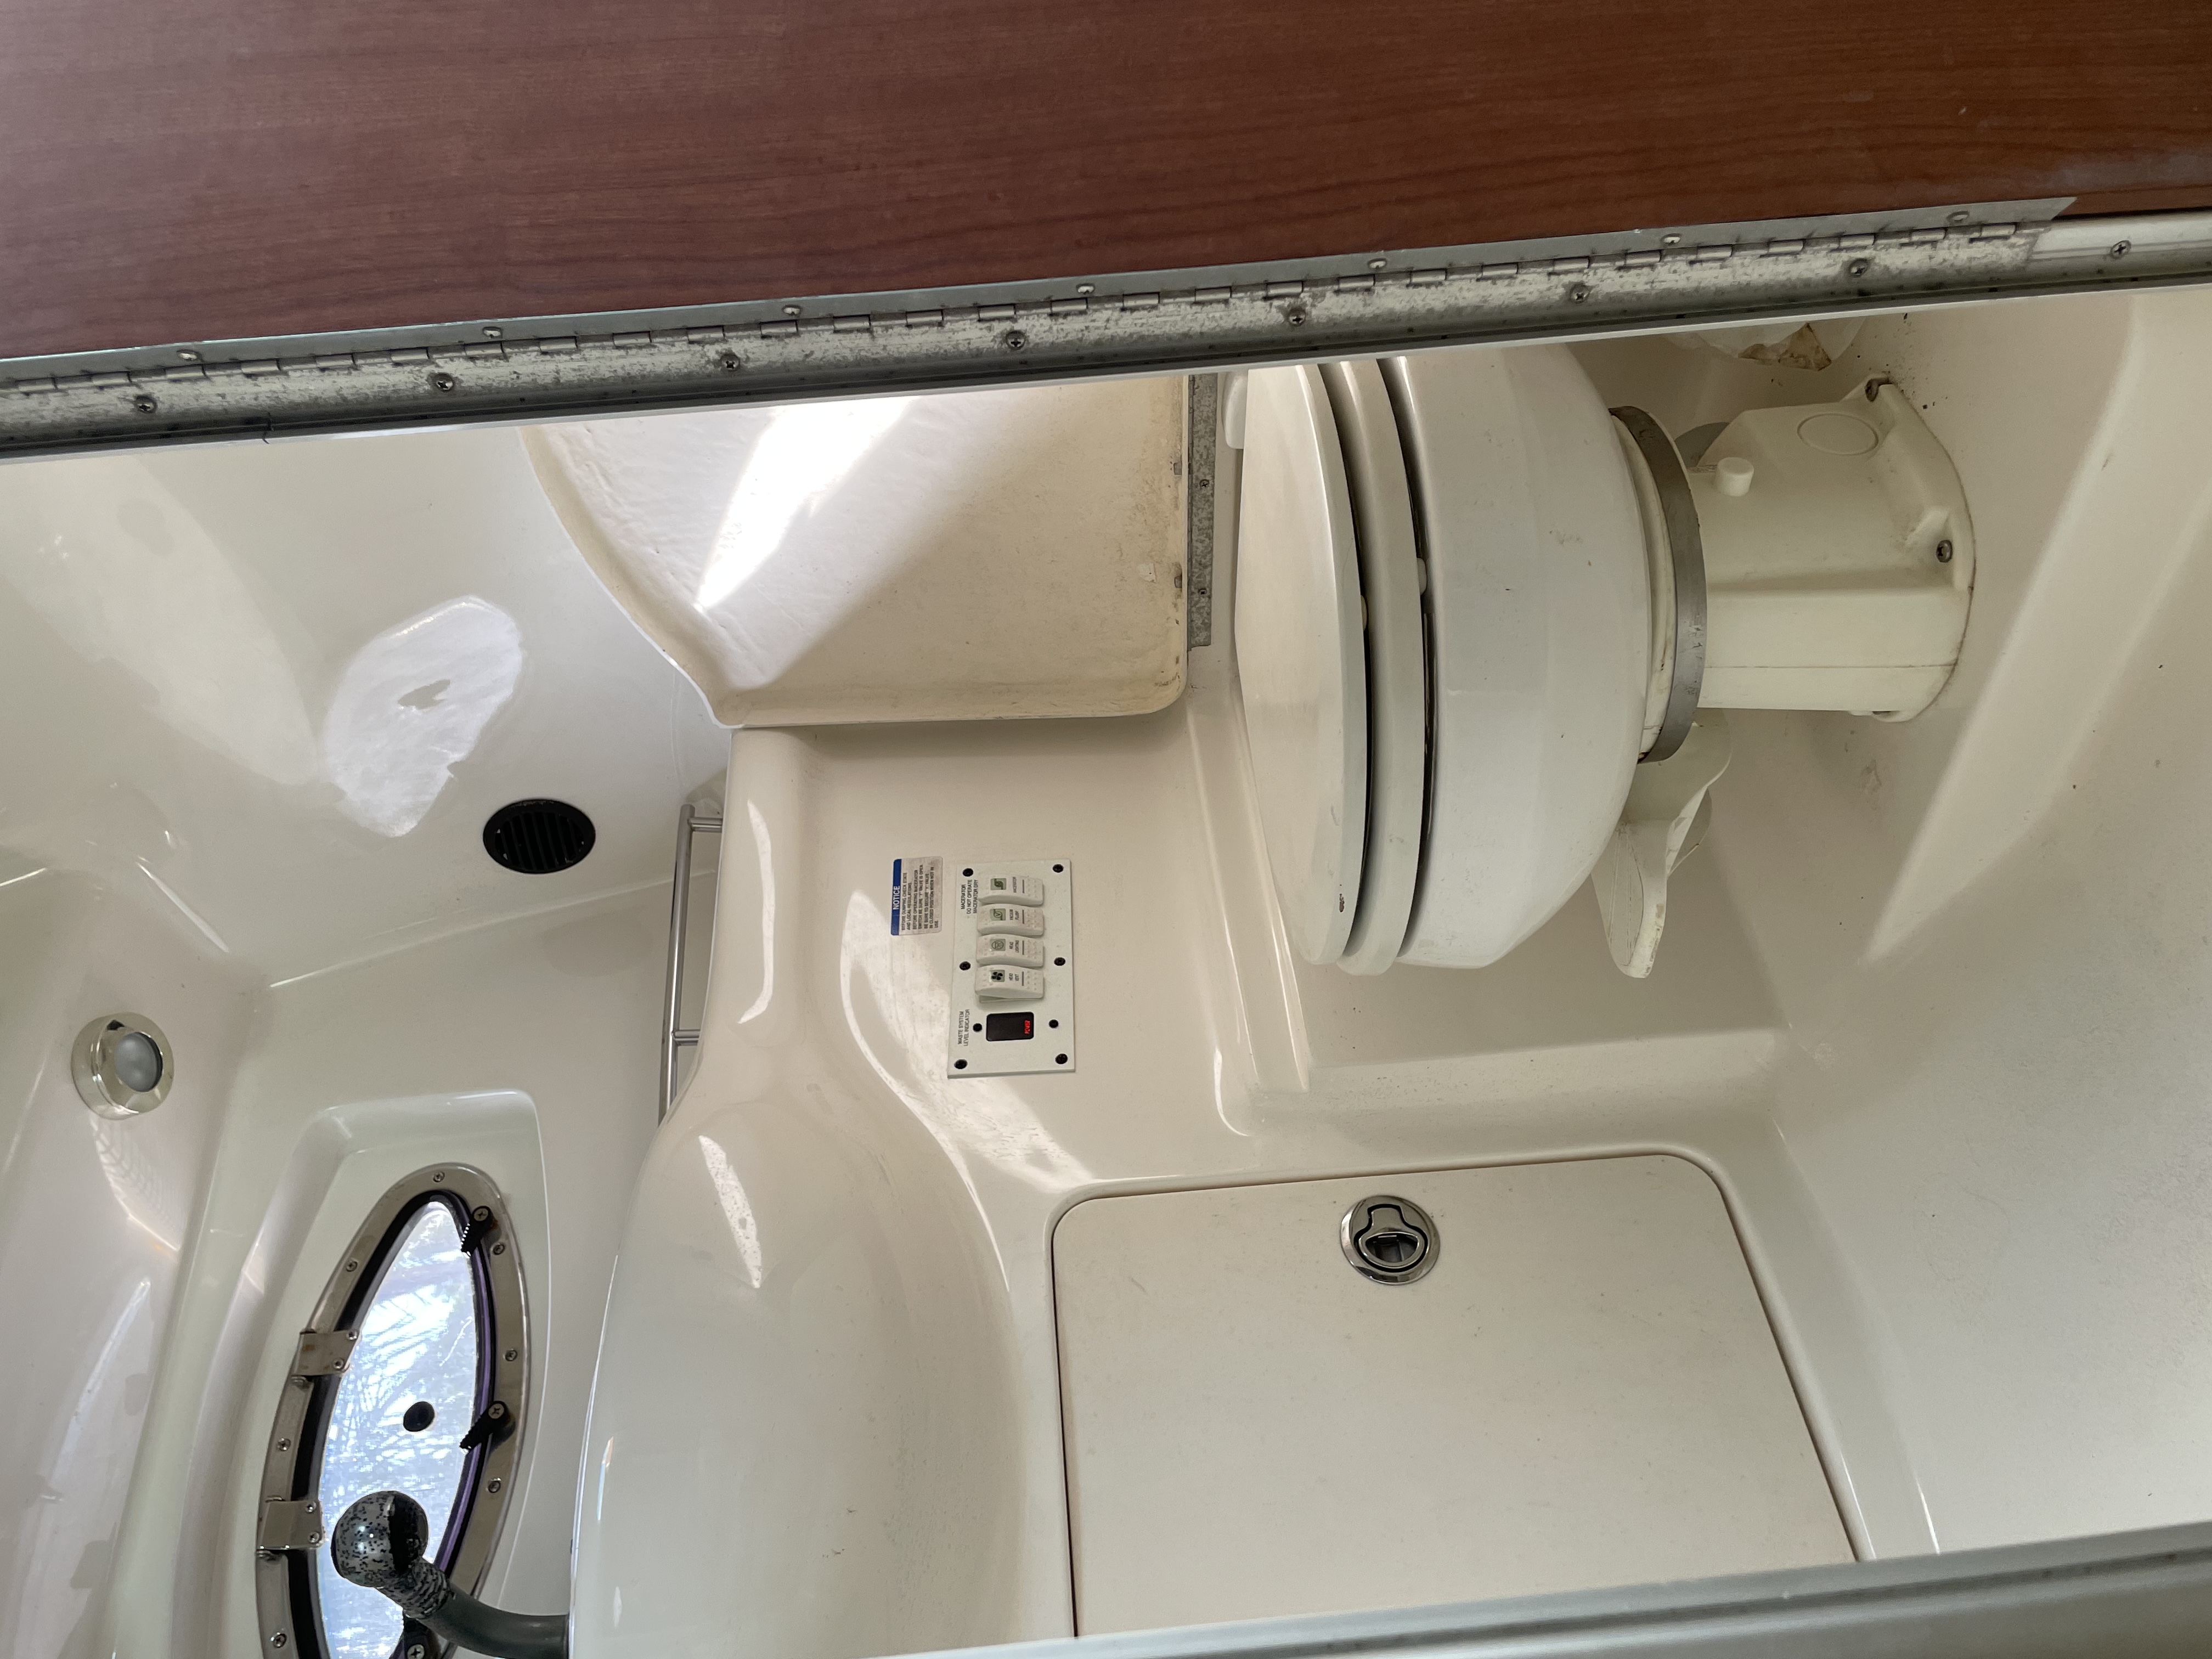 2003 Chaparral Signature 280 Power boat for sale in Jacksonville, FL - image 7 